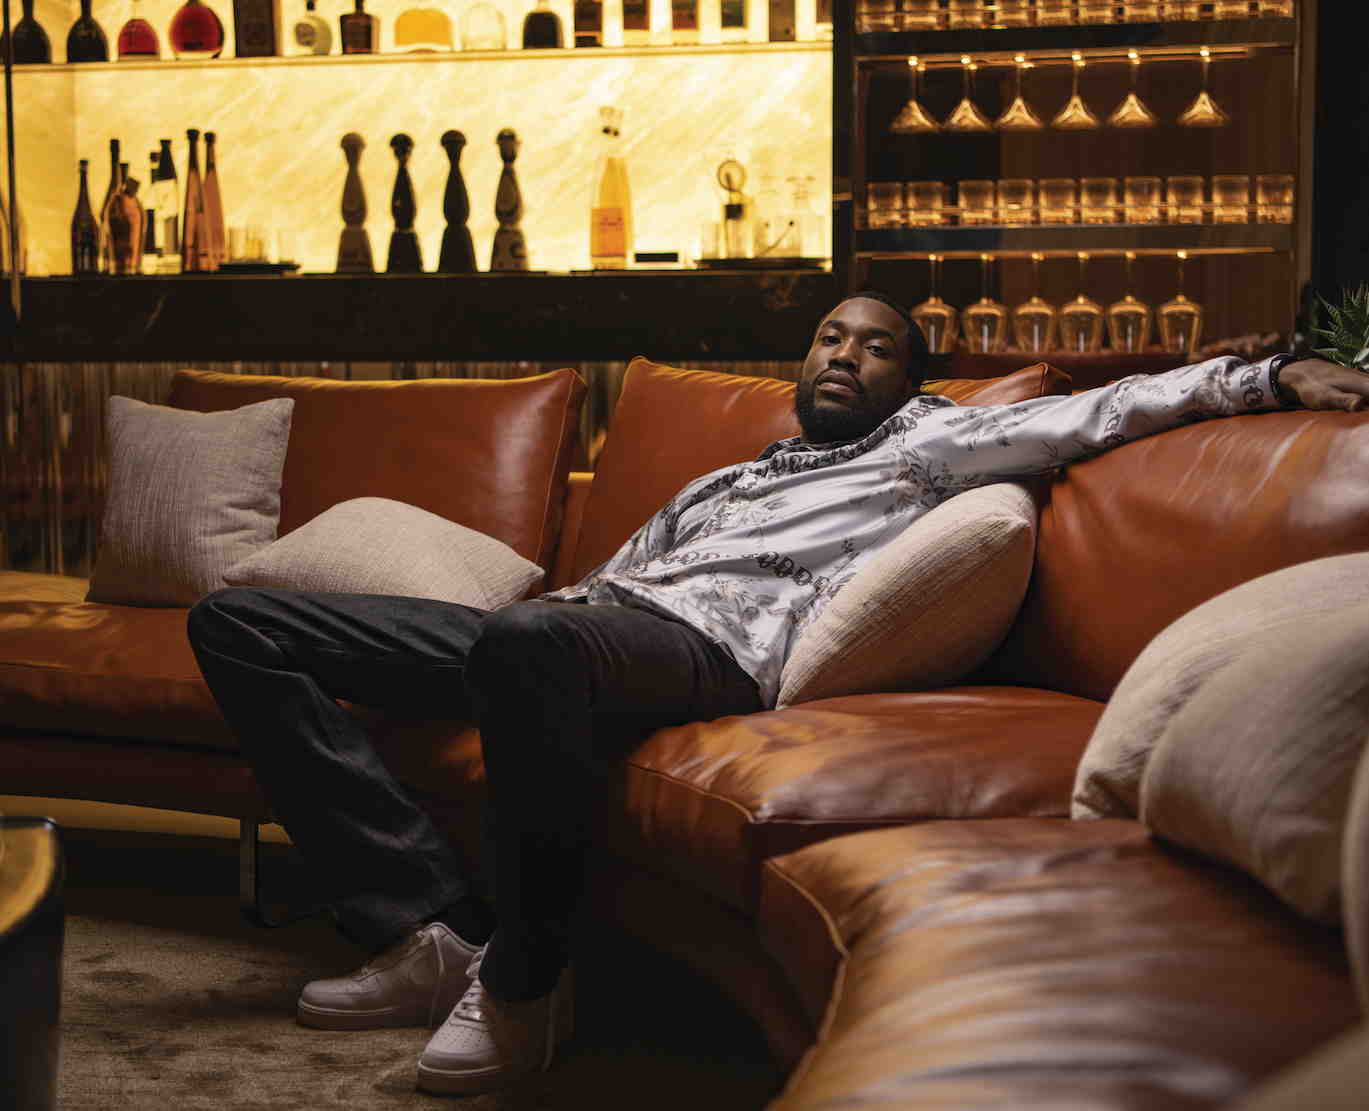 Meek Mill Becomes Co-Owner Of Lids